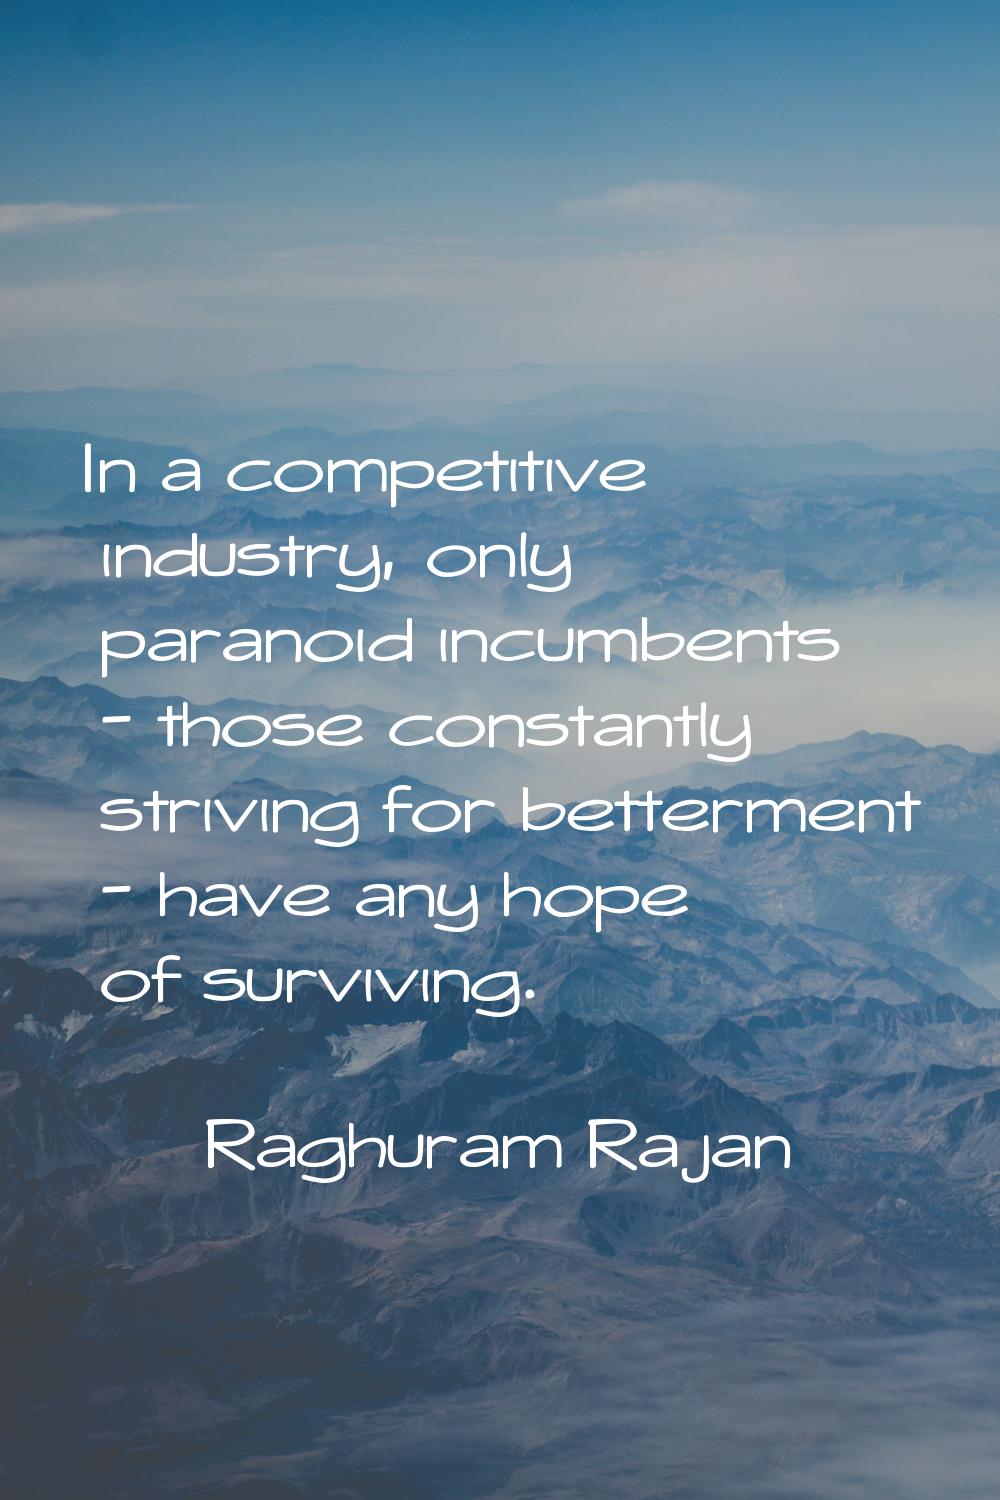 In a competitive industry, only paranoid incumbents - those constantly striving for betterment - ha